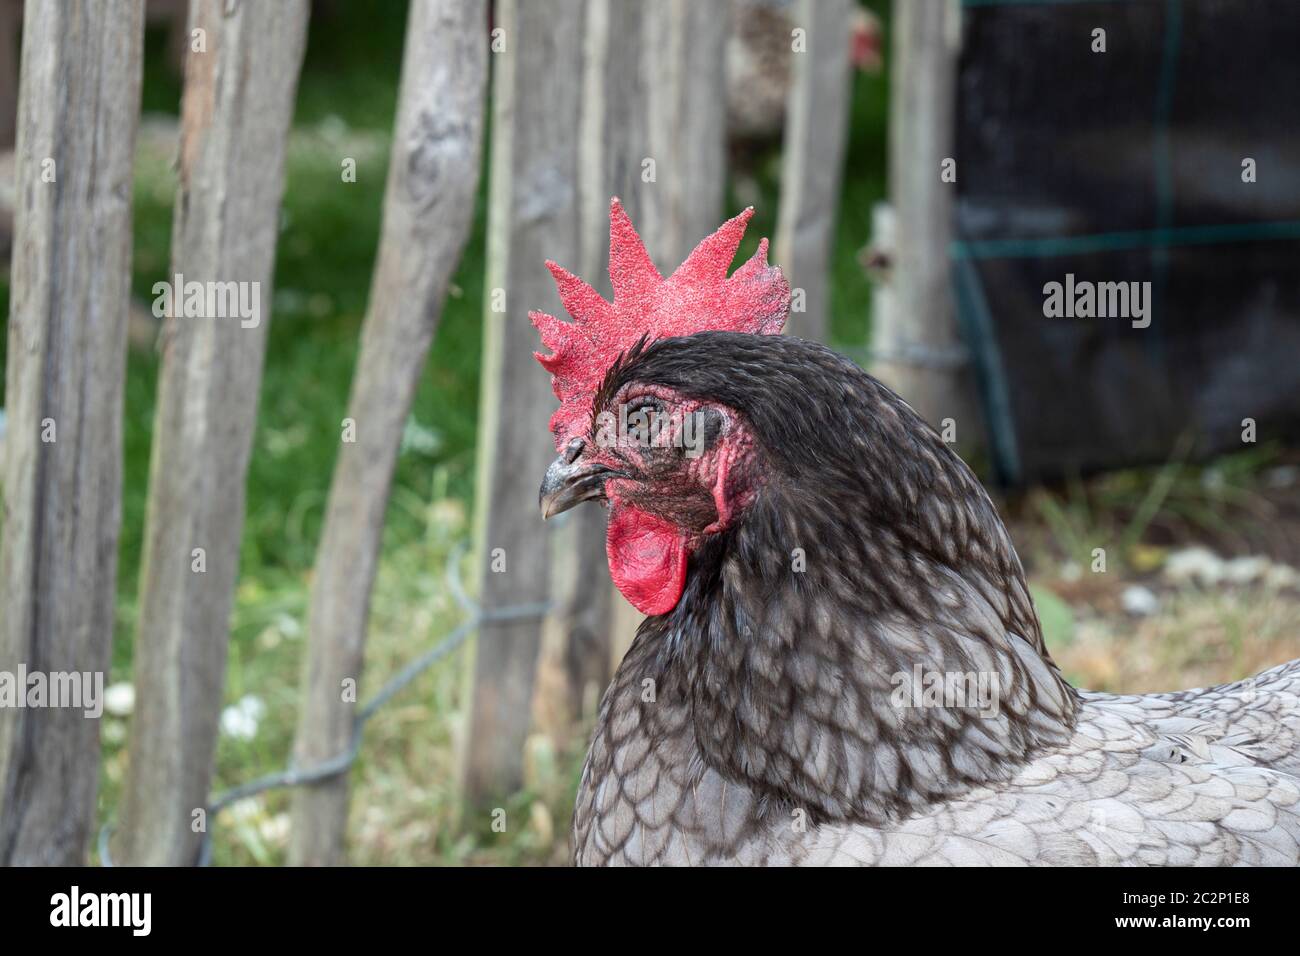 Portrait photo of a gray laying hen with a red comb, named Barred Plymouth Rock Stock Photo